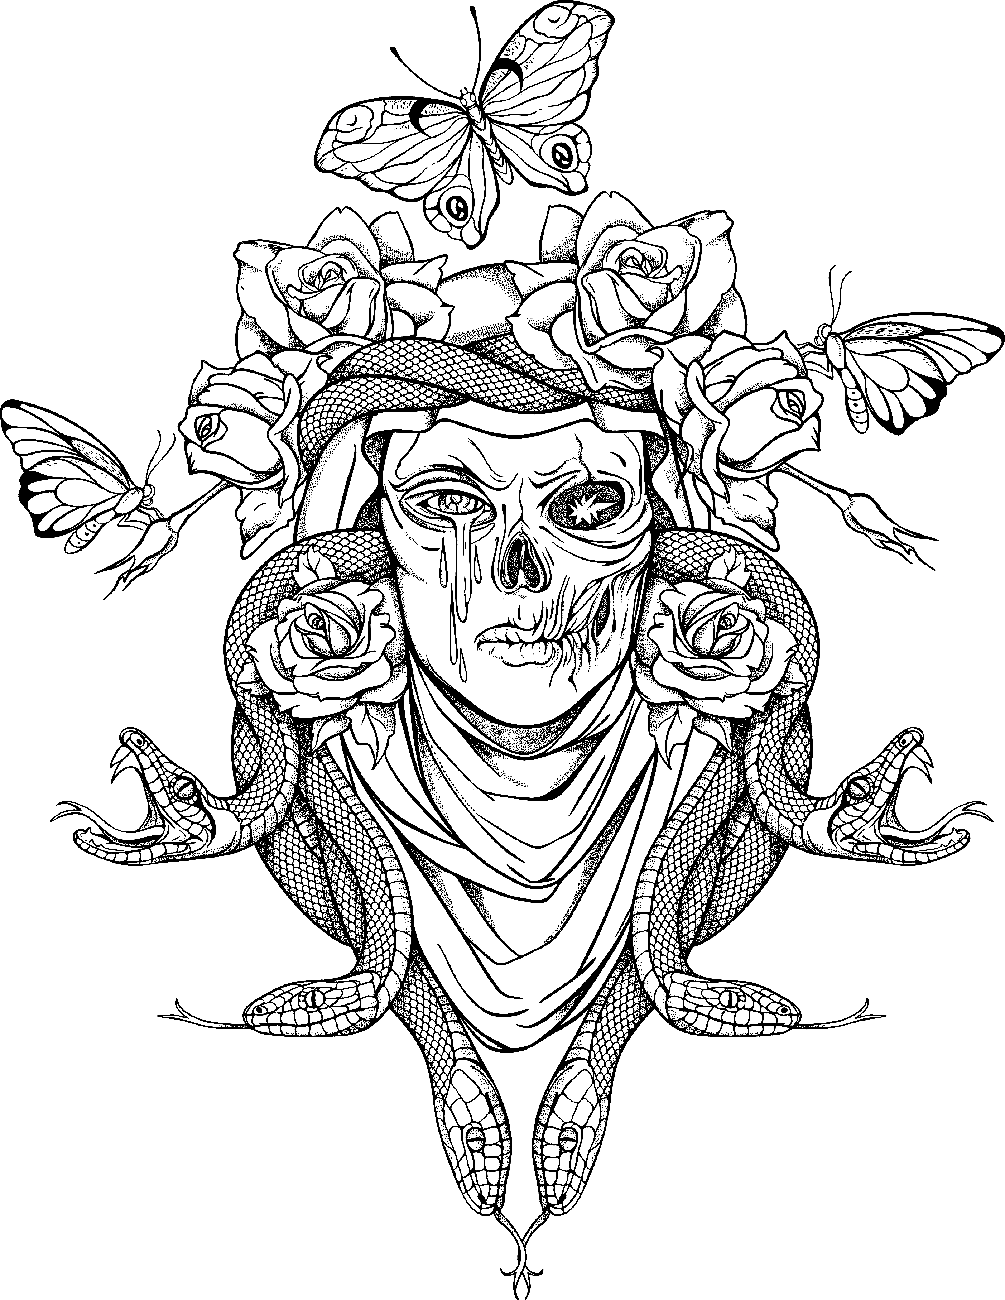 Skull, Snakes, Butterflies and Roses Coloring Pages